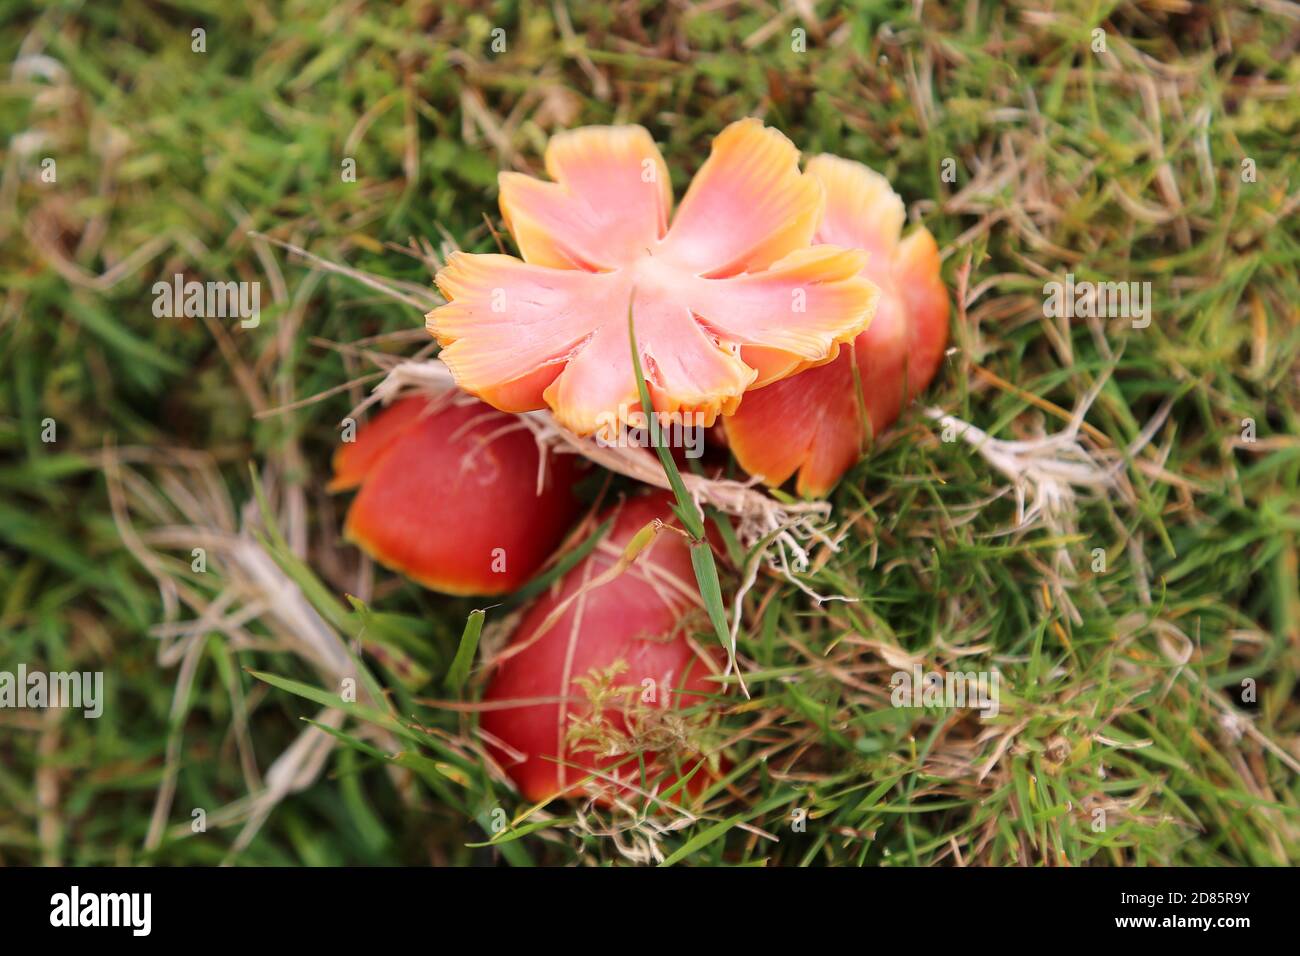 Scarlet Waxcap fungus (Hygrocybe coccinea), Pant y Llyn, Builth Wells, Brecknockshire, Powys, Wales, Great Britain, United Kingdom, UK, Europe Stock Photo